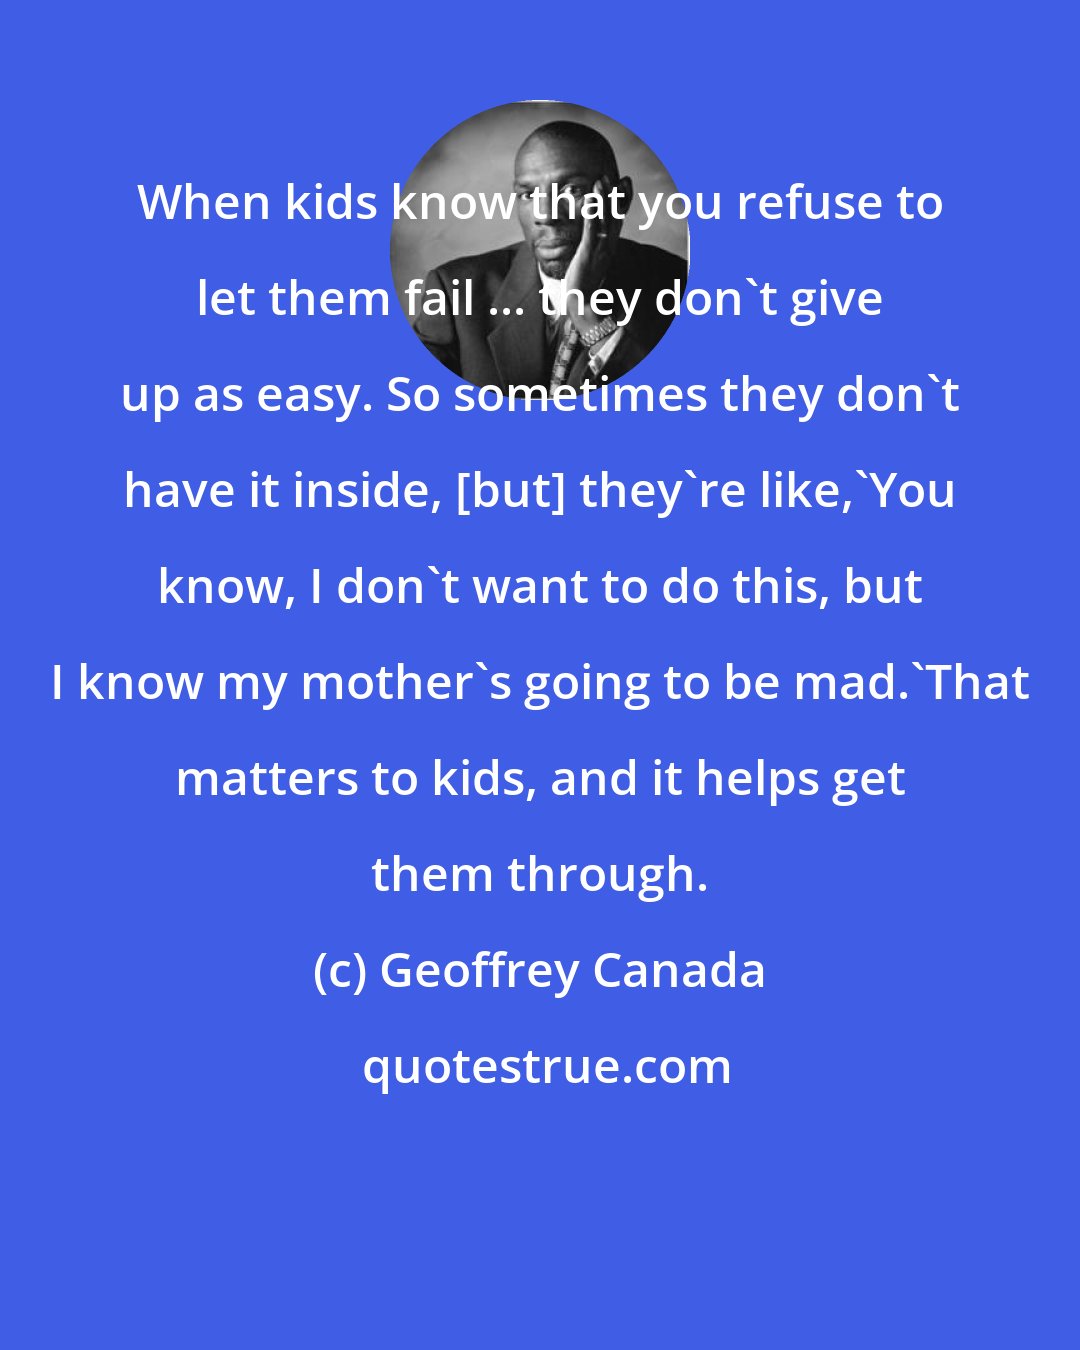 Geoffrey Canada: When kids know that you refuse to let them fail ... they don't give up as easy. So sometimes they don't have it inside, [but] they're like,'You know, I don't want to do this, but I know my mother's going to be mad.'That matters to kids, and it helps get them through.